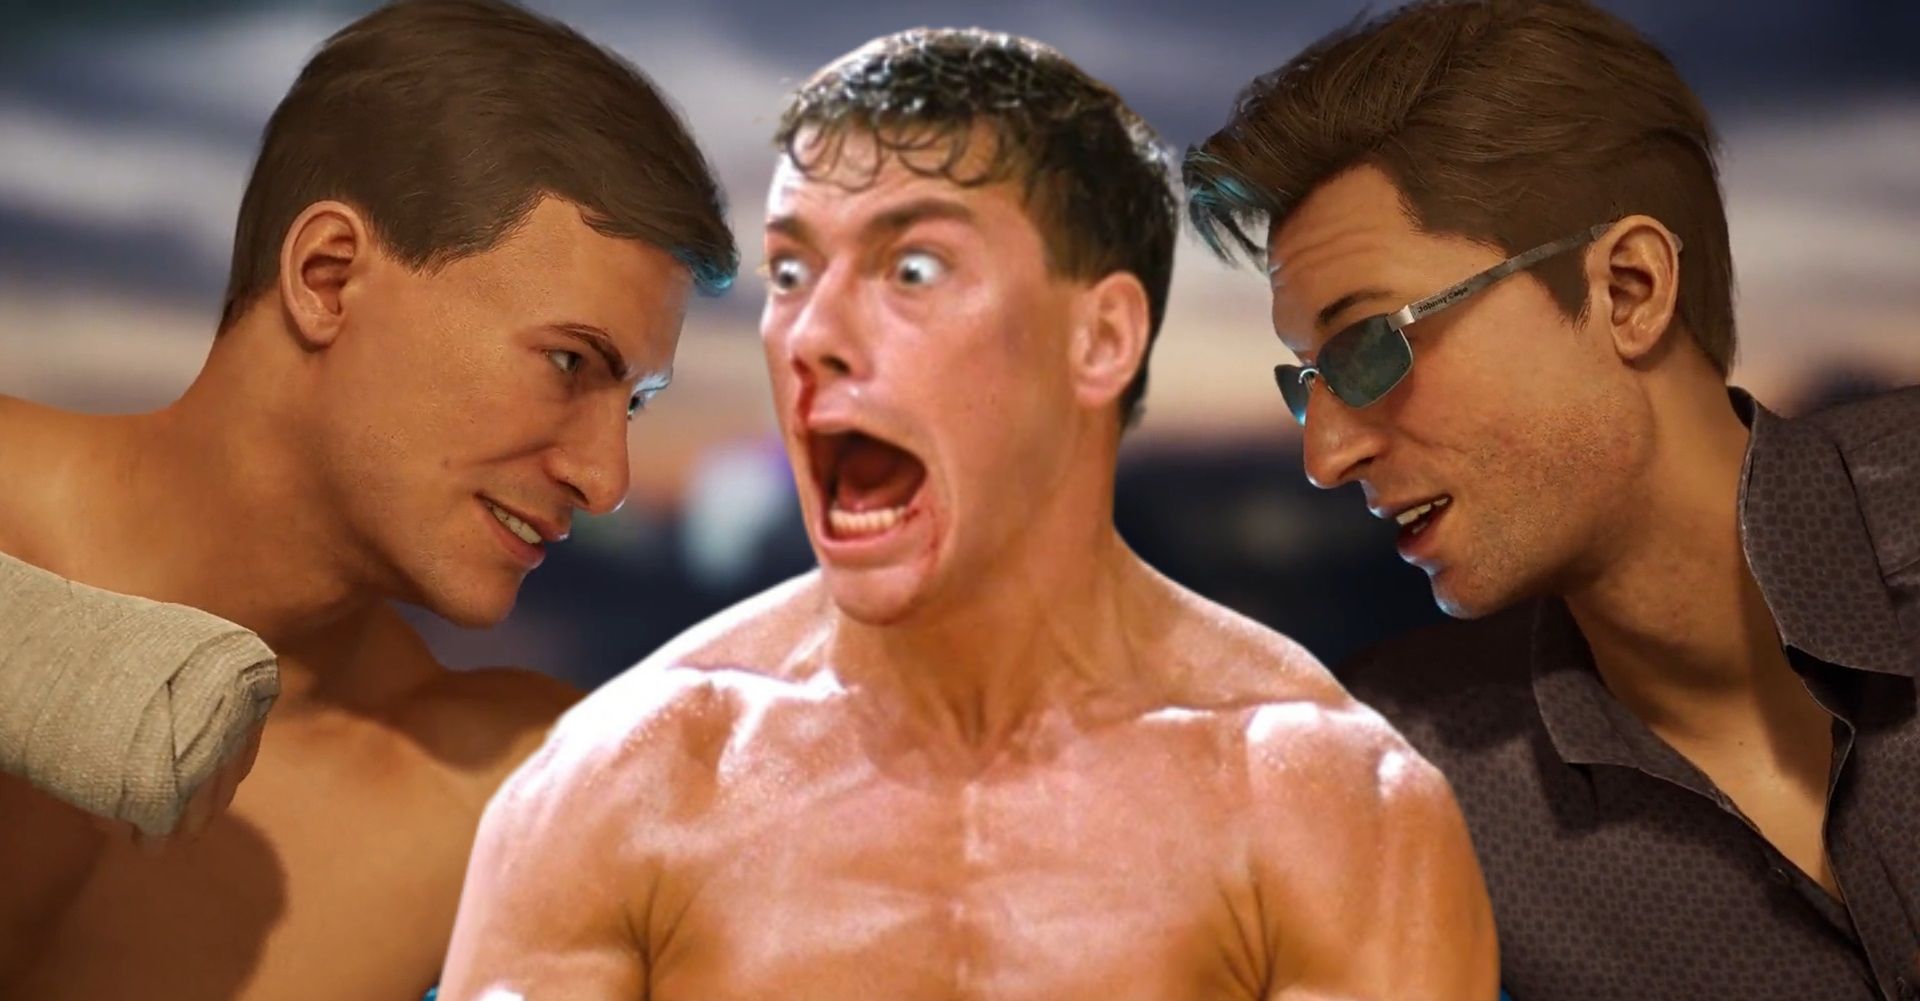 Jean-Claude Van Damme Is Johnny Cage & Dishes Out Fatality in Mortal Kombat 1 Footage